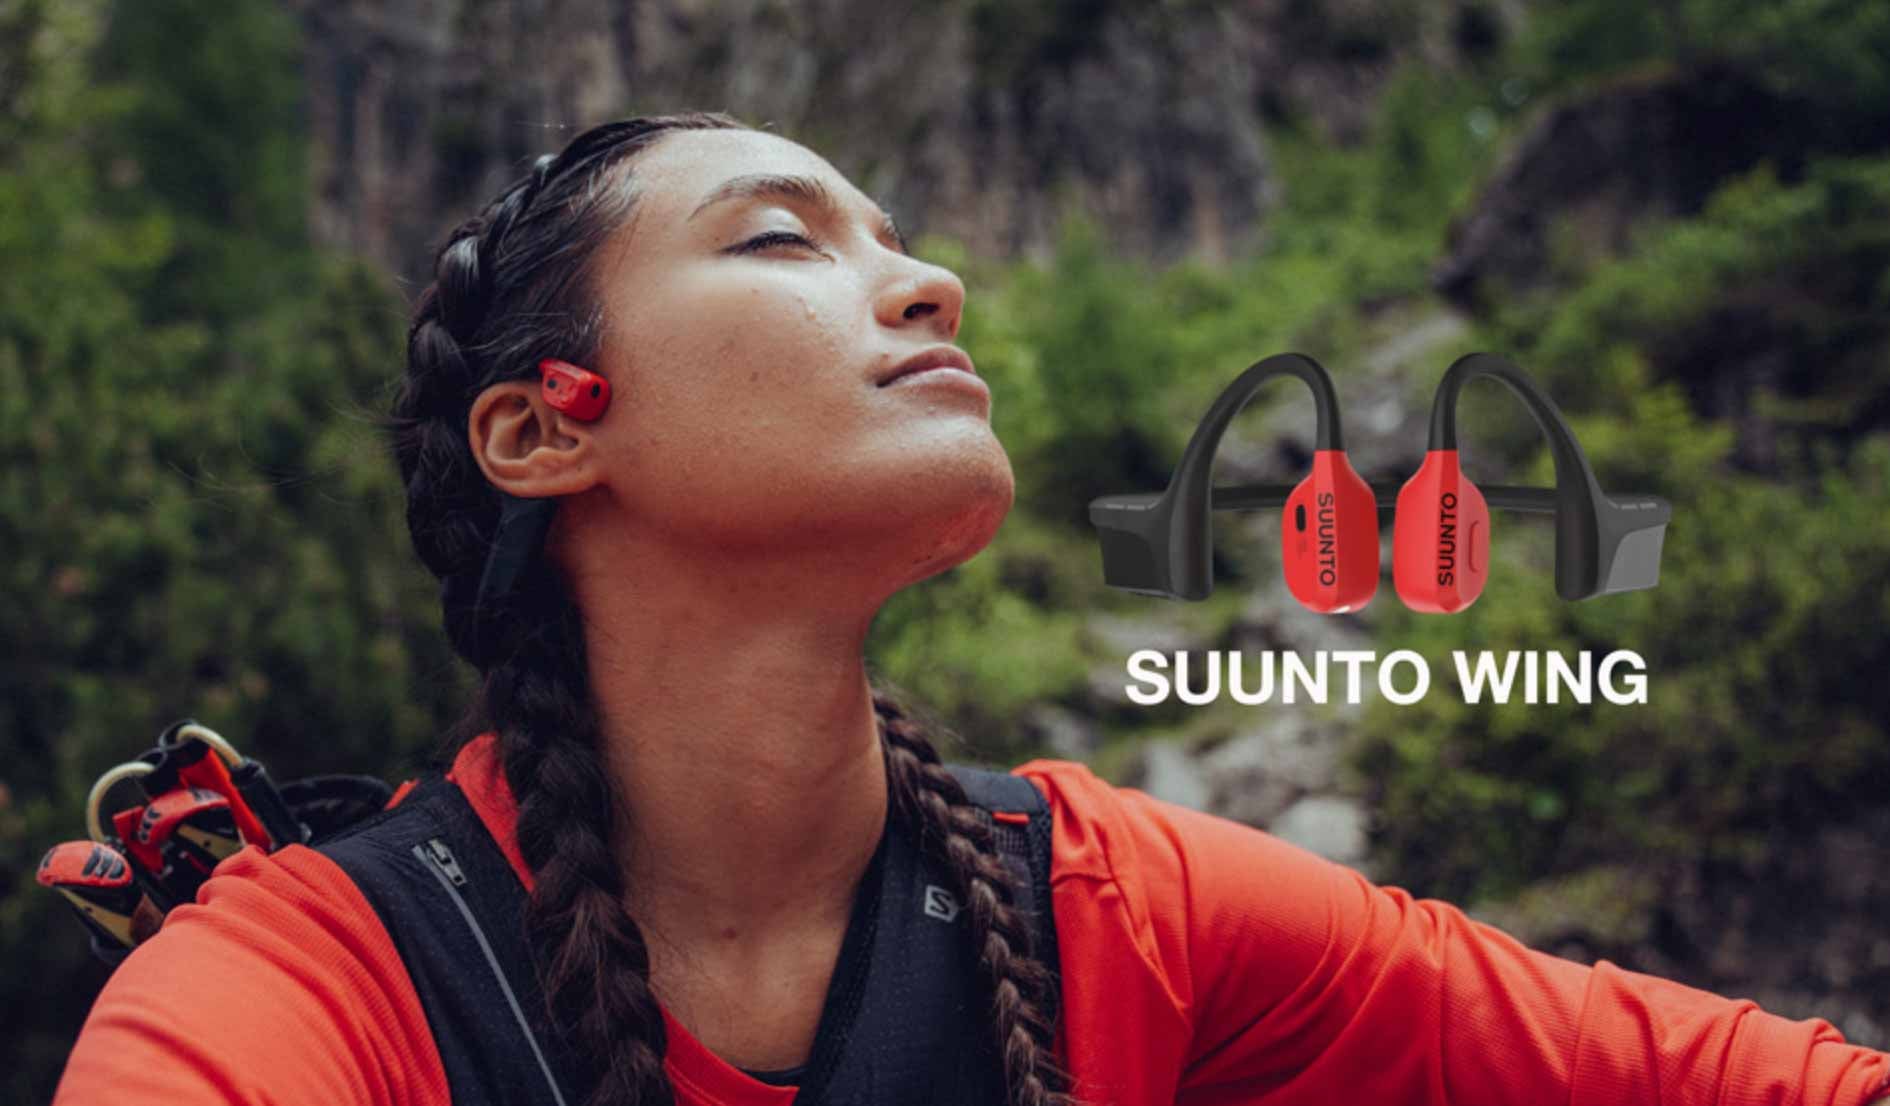 Suunto Race and Suunto Wing: Finnish Brand Offers New Models in